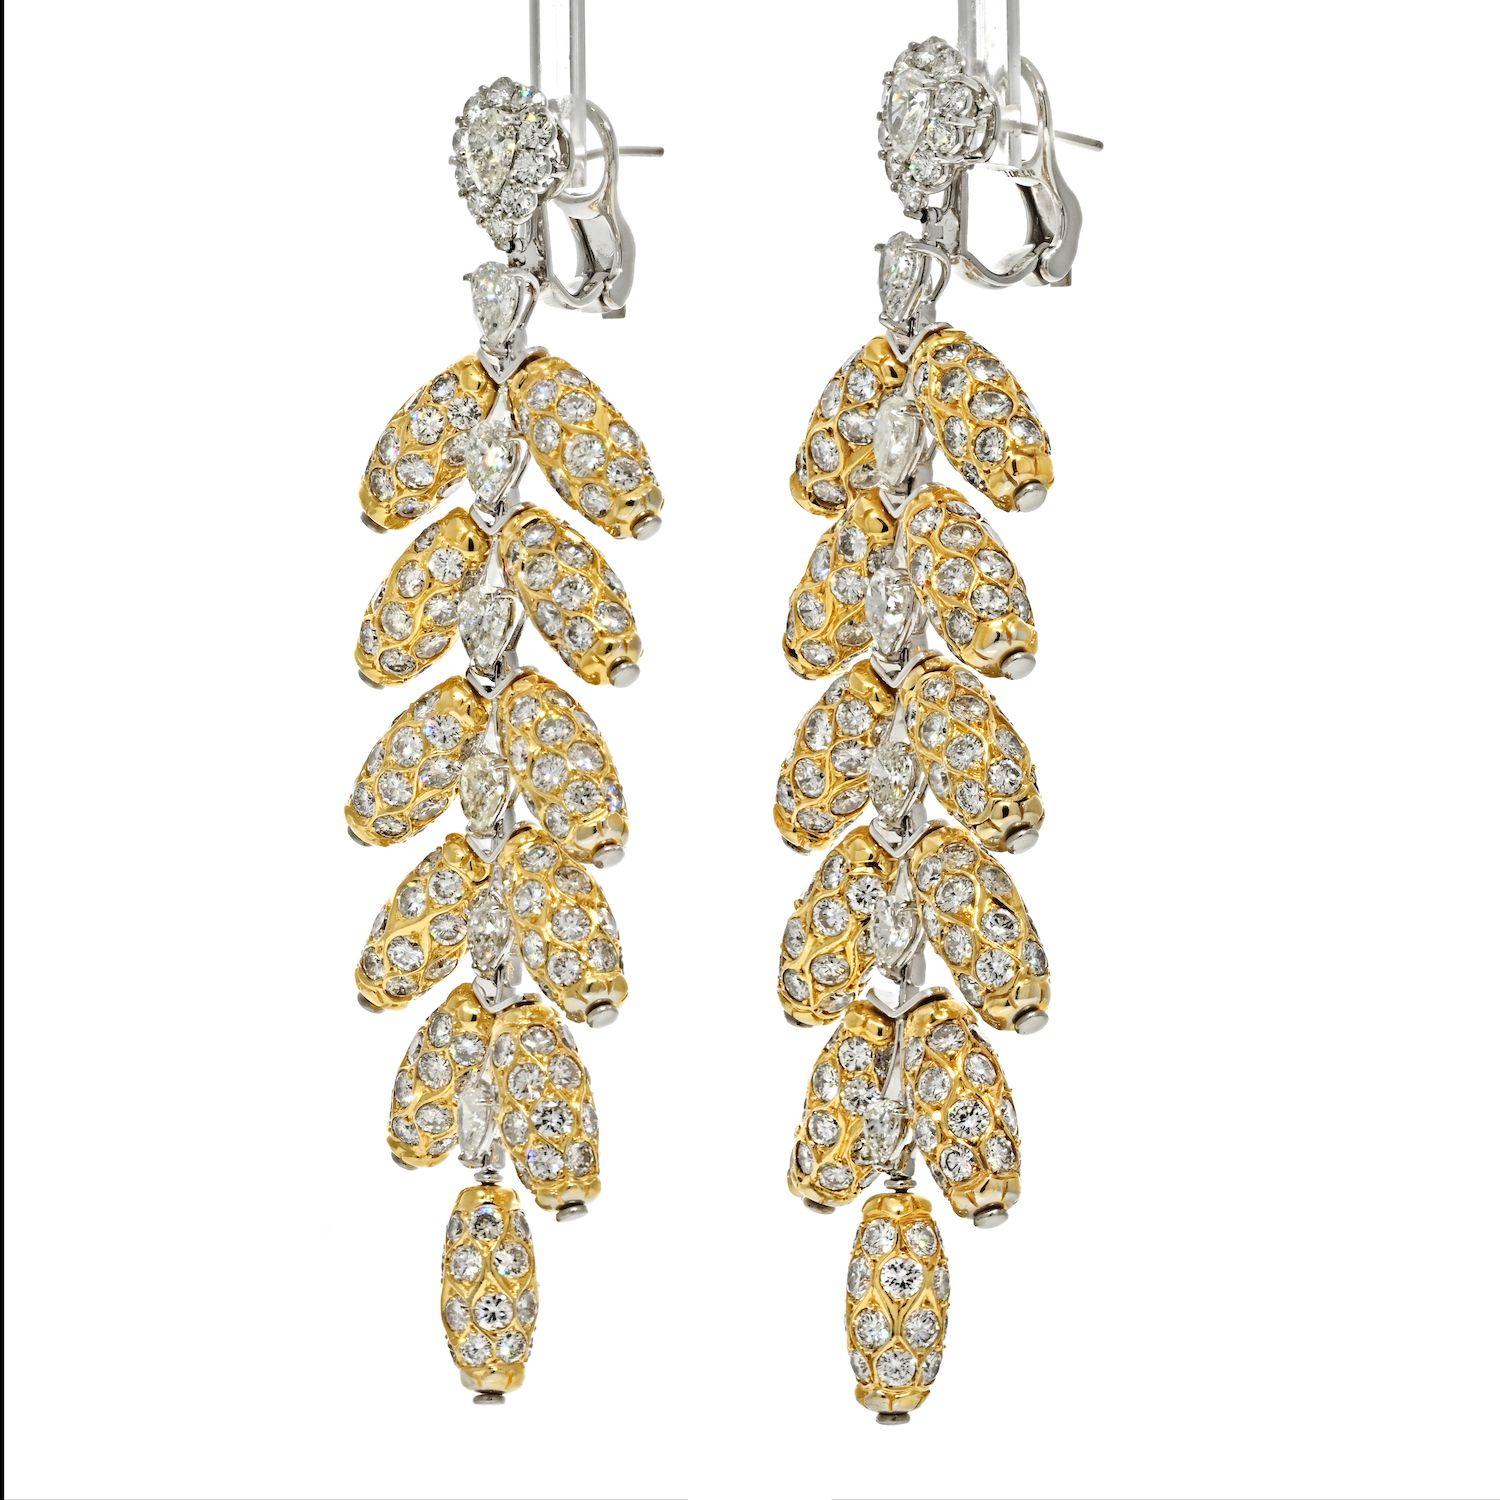 From our Estate Collection. A free-spirited creation dramatic pendant feather earrings capture the beauty and all the glam of the peacock's feather motif in intricately detailed 18K yellow gold diamond jewel. These earrings feature 2 diamonds of